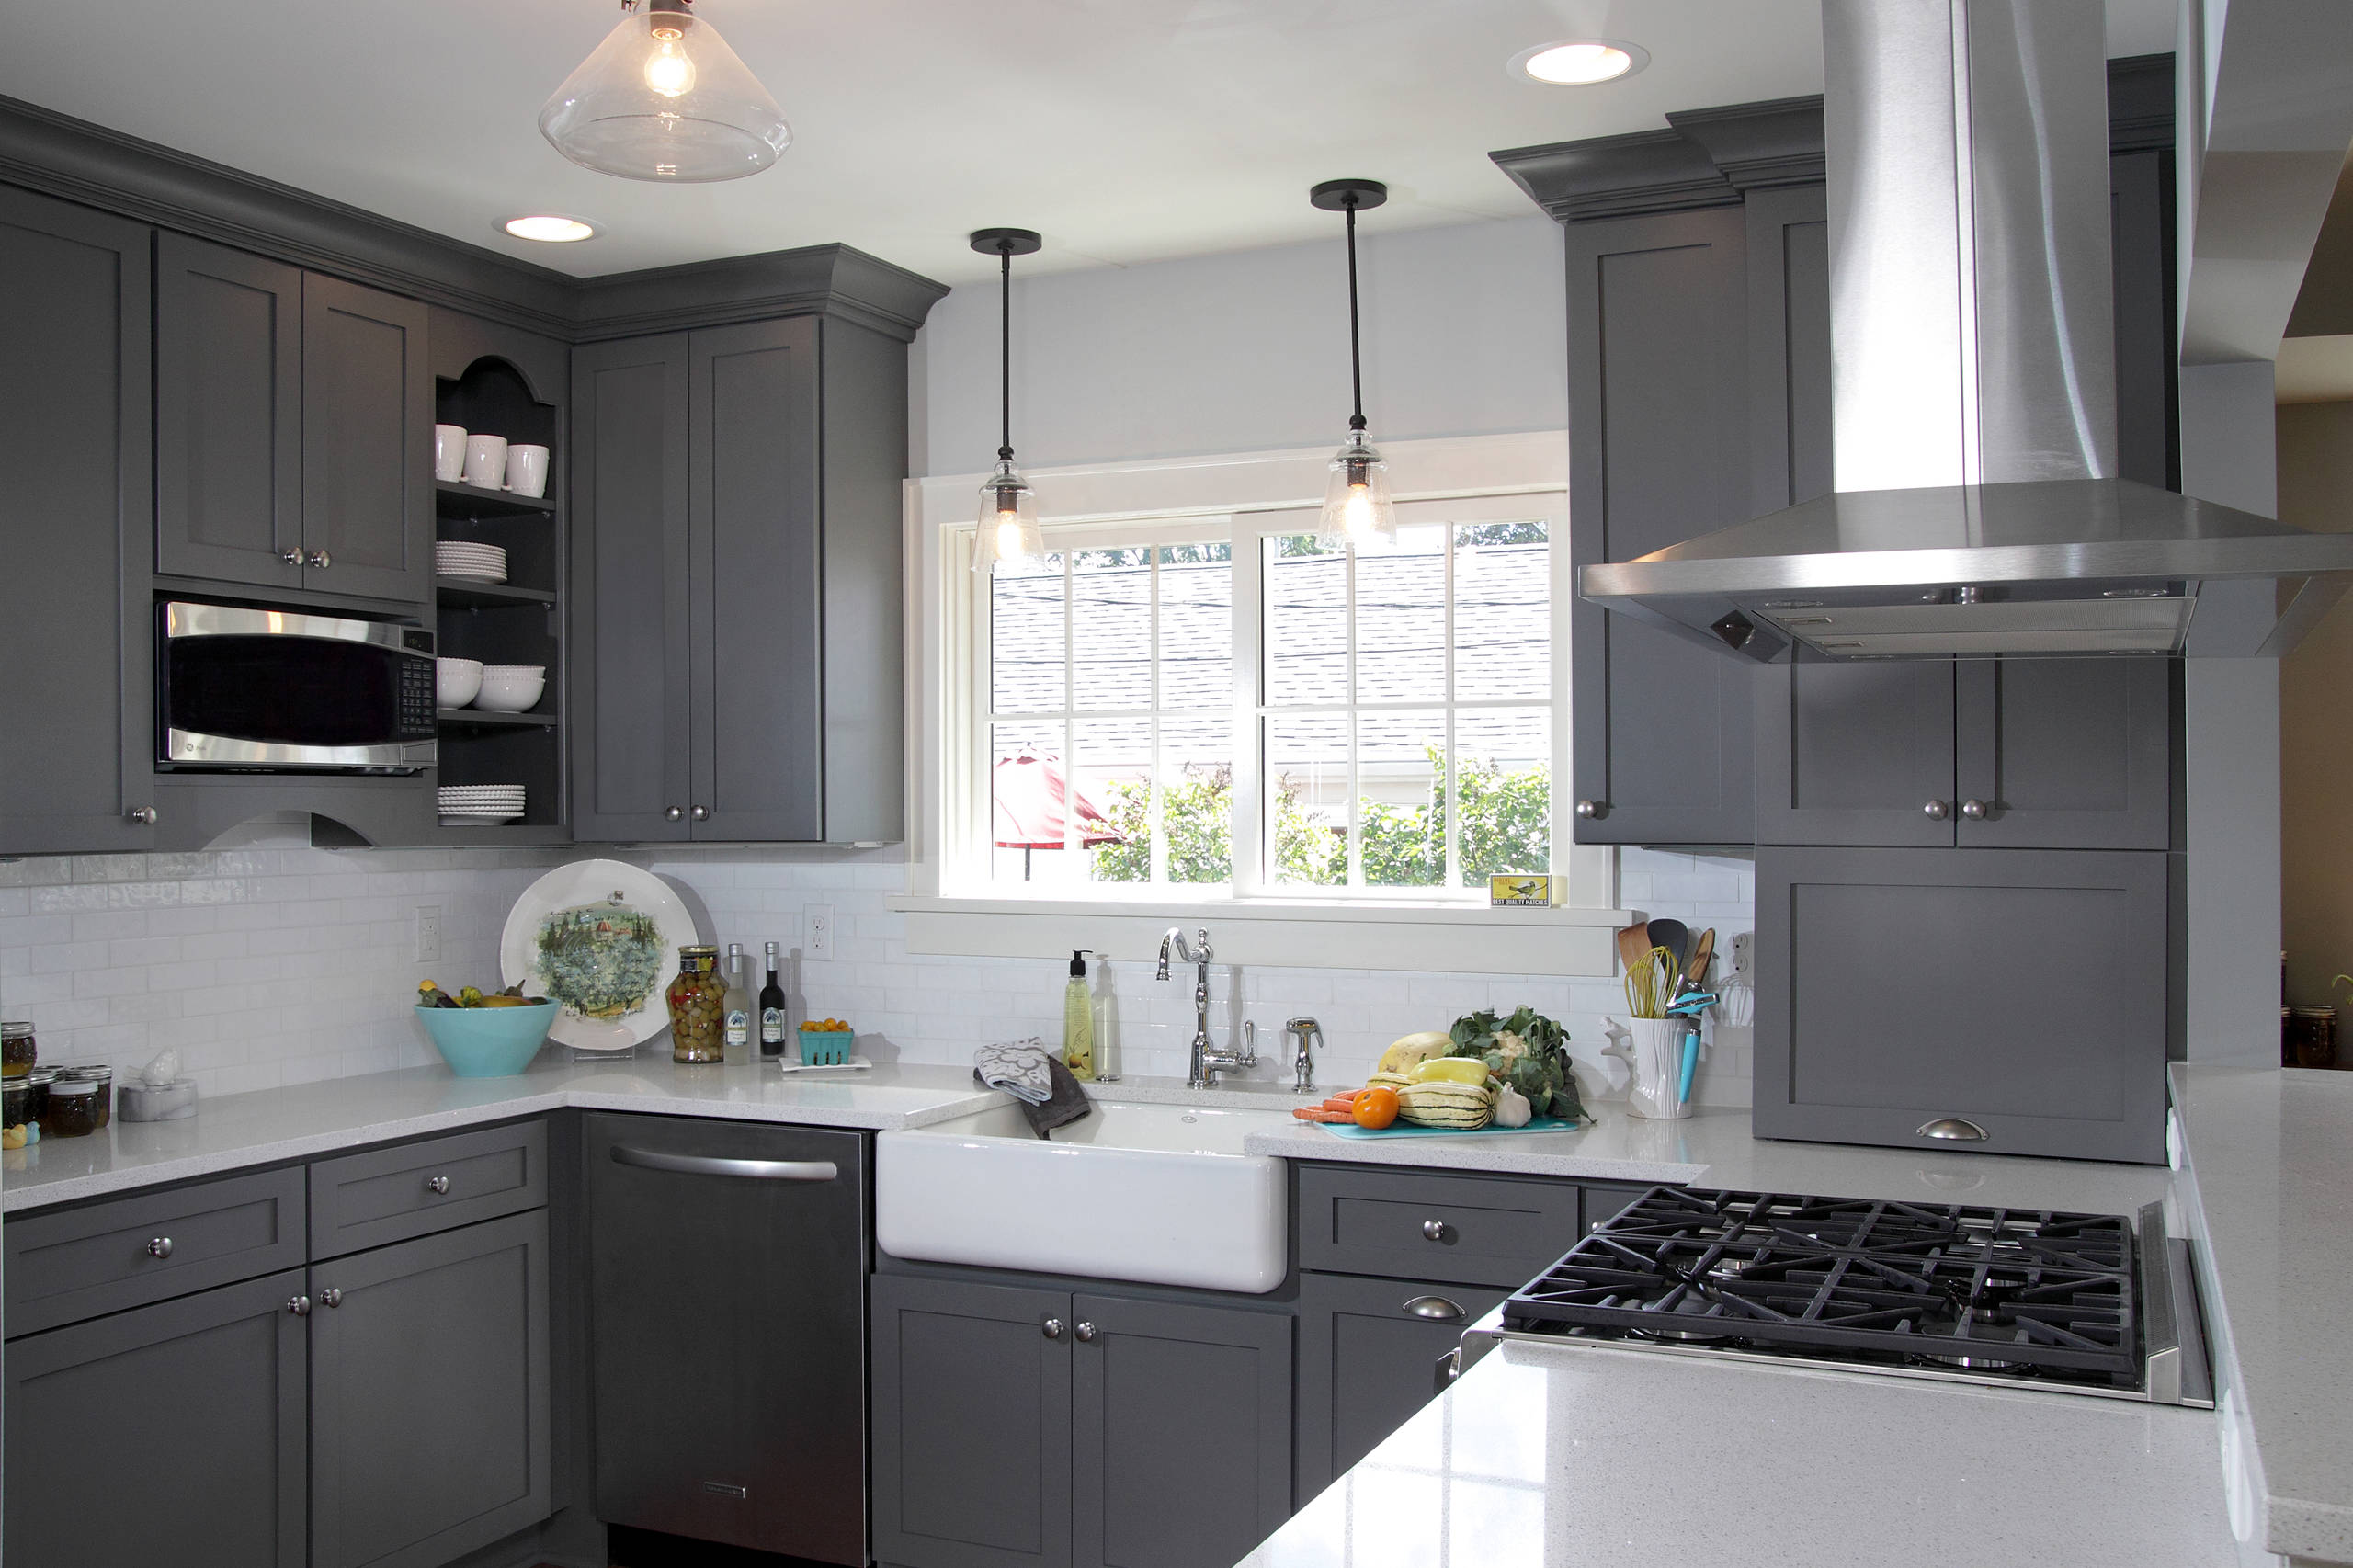 How to use grey kitchen cabinets? 3 easy ways